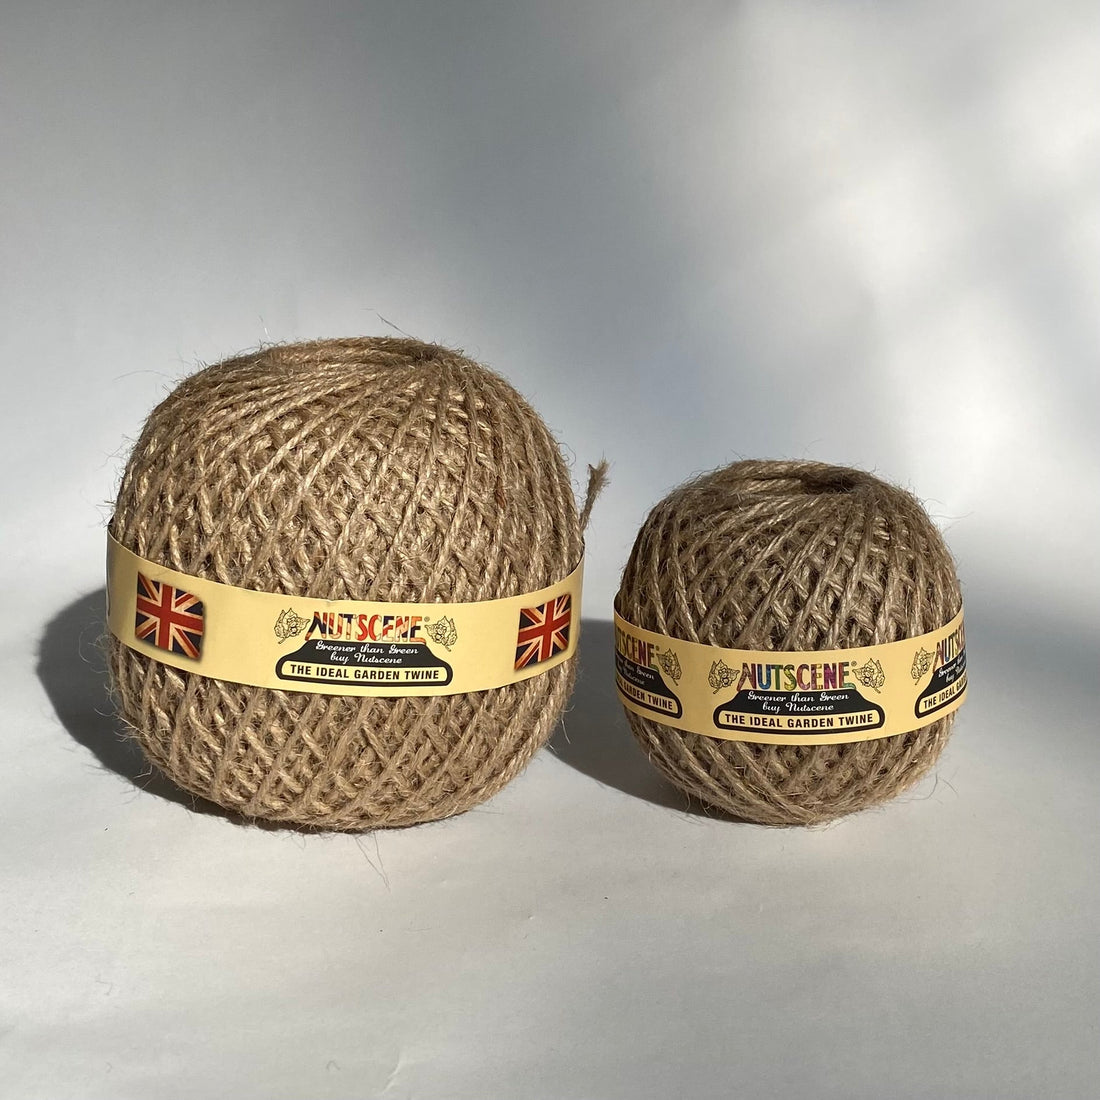 Nutscene Twine Balls - Natural - The Flower Crate